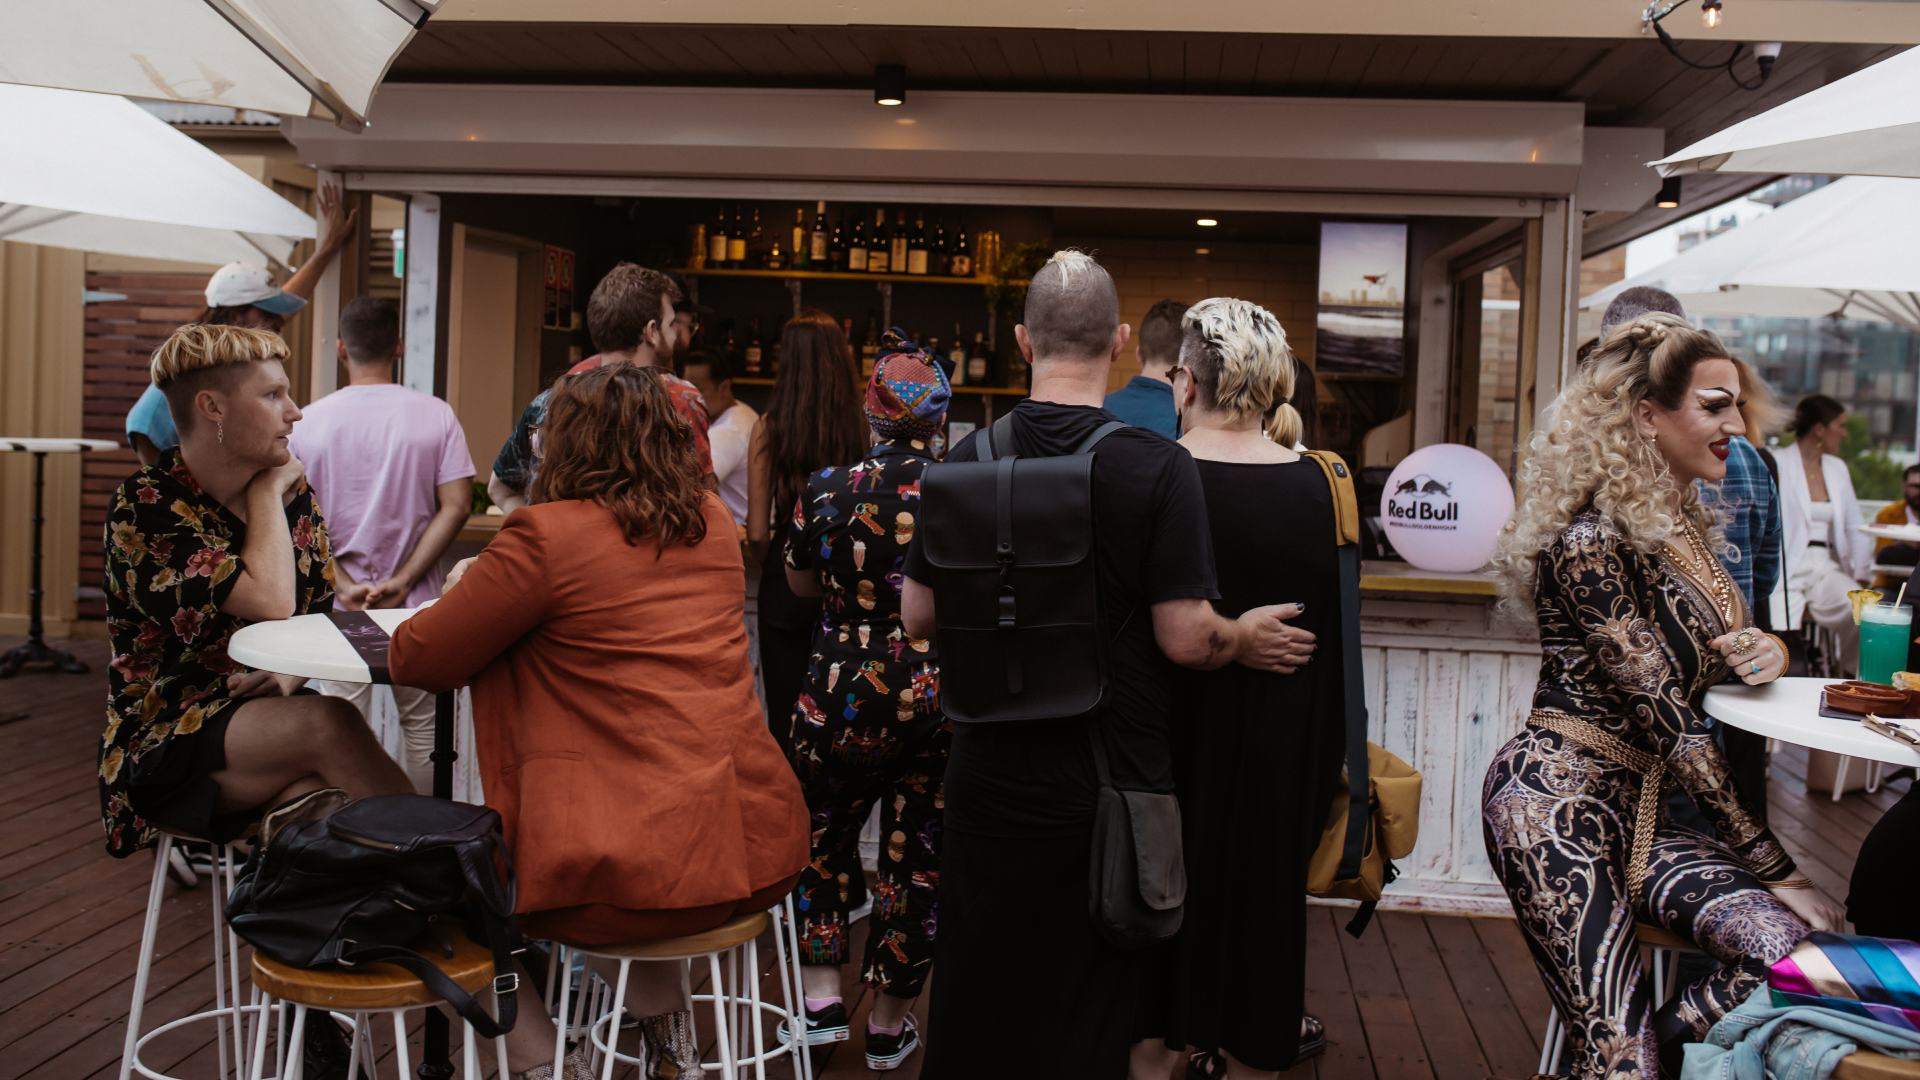 The Burdekin Hotel Has Expanded with a New Rooftop Bar Overlooking Hyde Park and Oxford Street